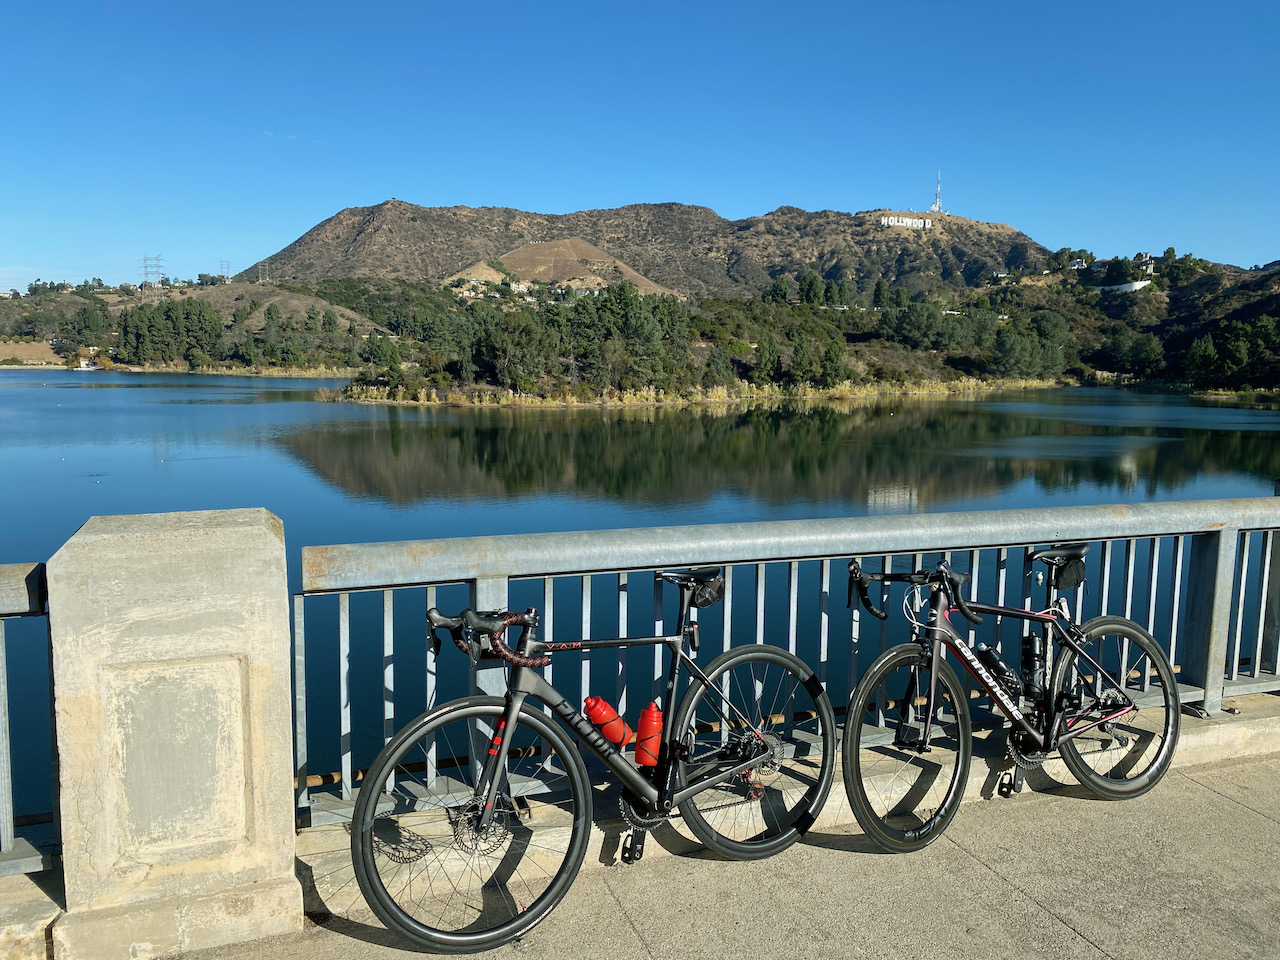 Bicycles at the dam at the Hollywood Reservoir in Los Angeles, California